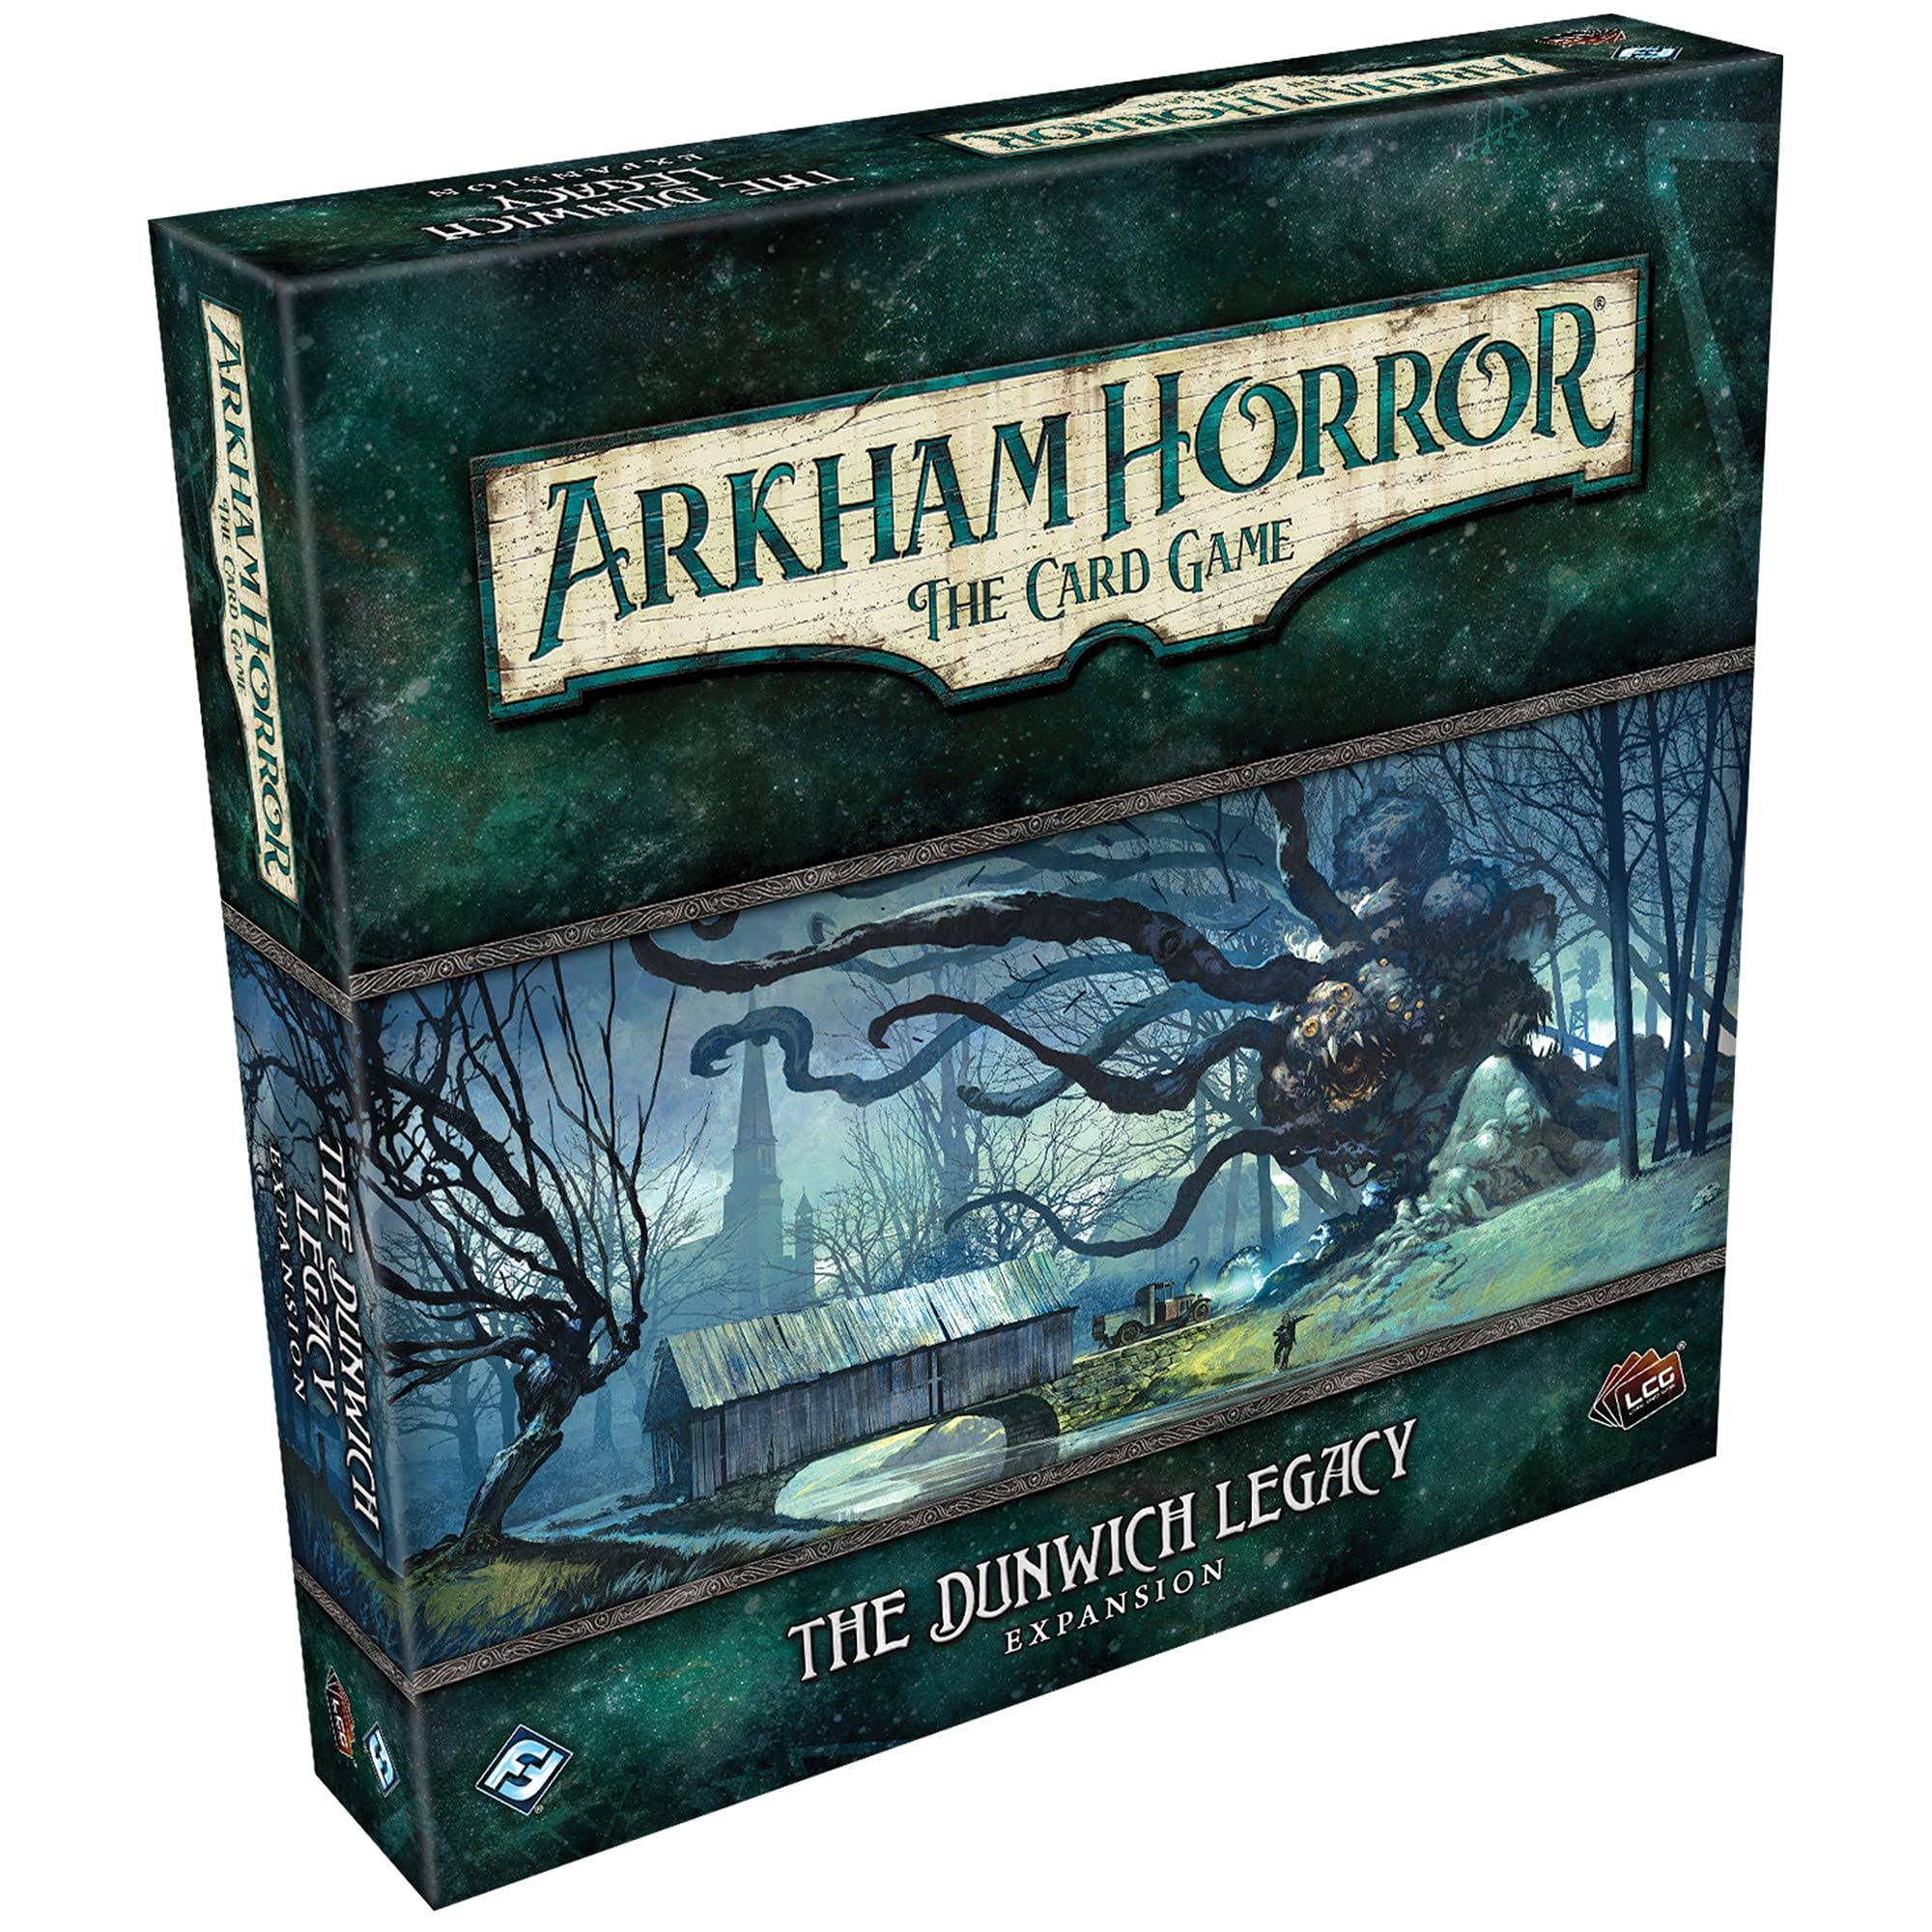 Arkham Horror LCG The Card Game: The Dunwich Legacy